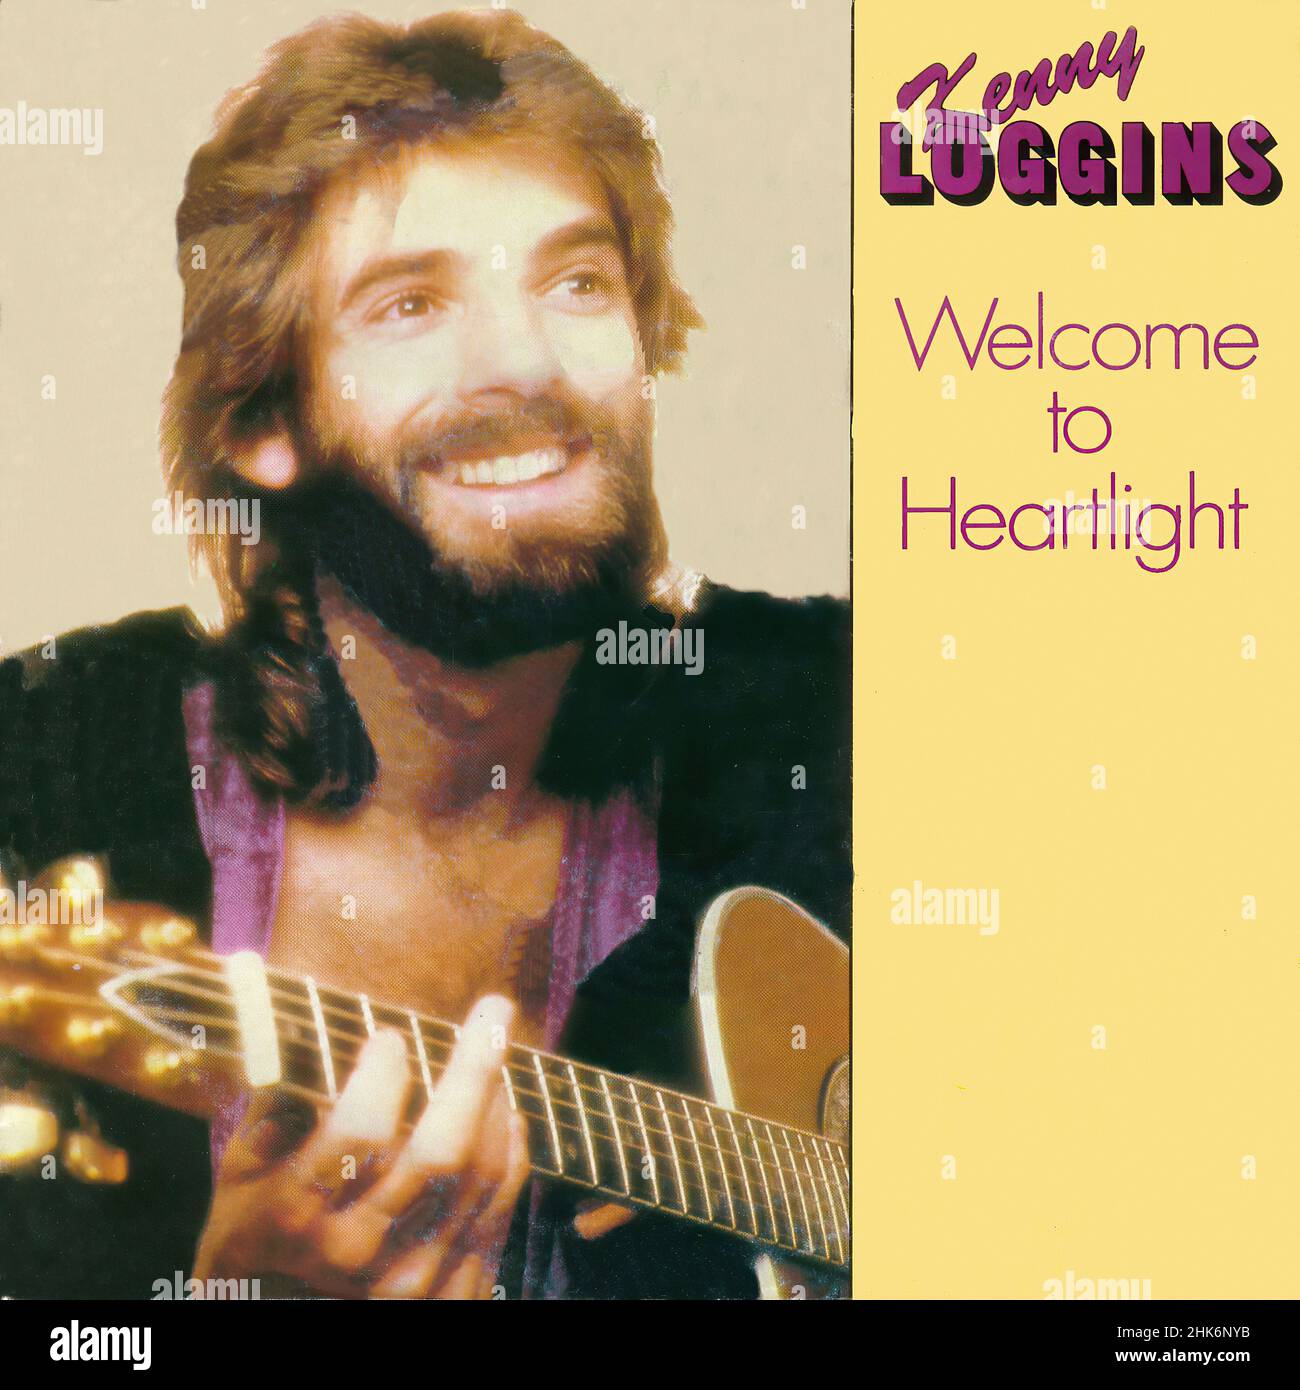 Vintage vinyl record cover - Loggins, Kenny - Welcome To Heartlight - 1982 Stock Photo